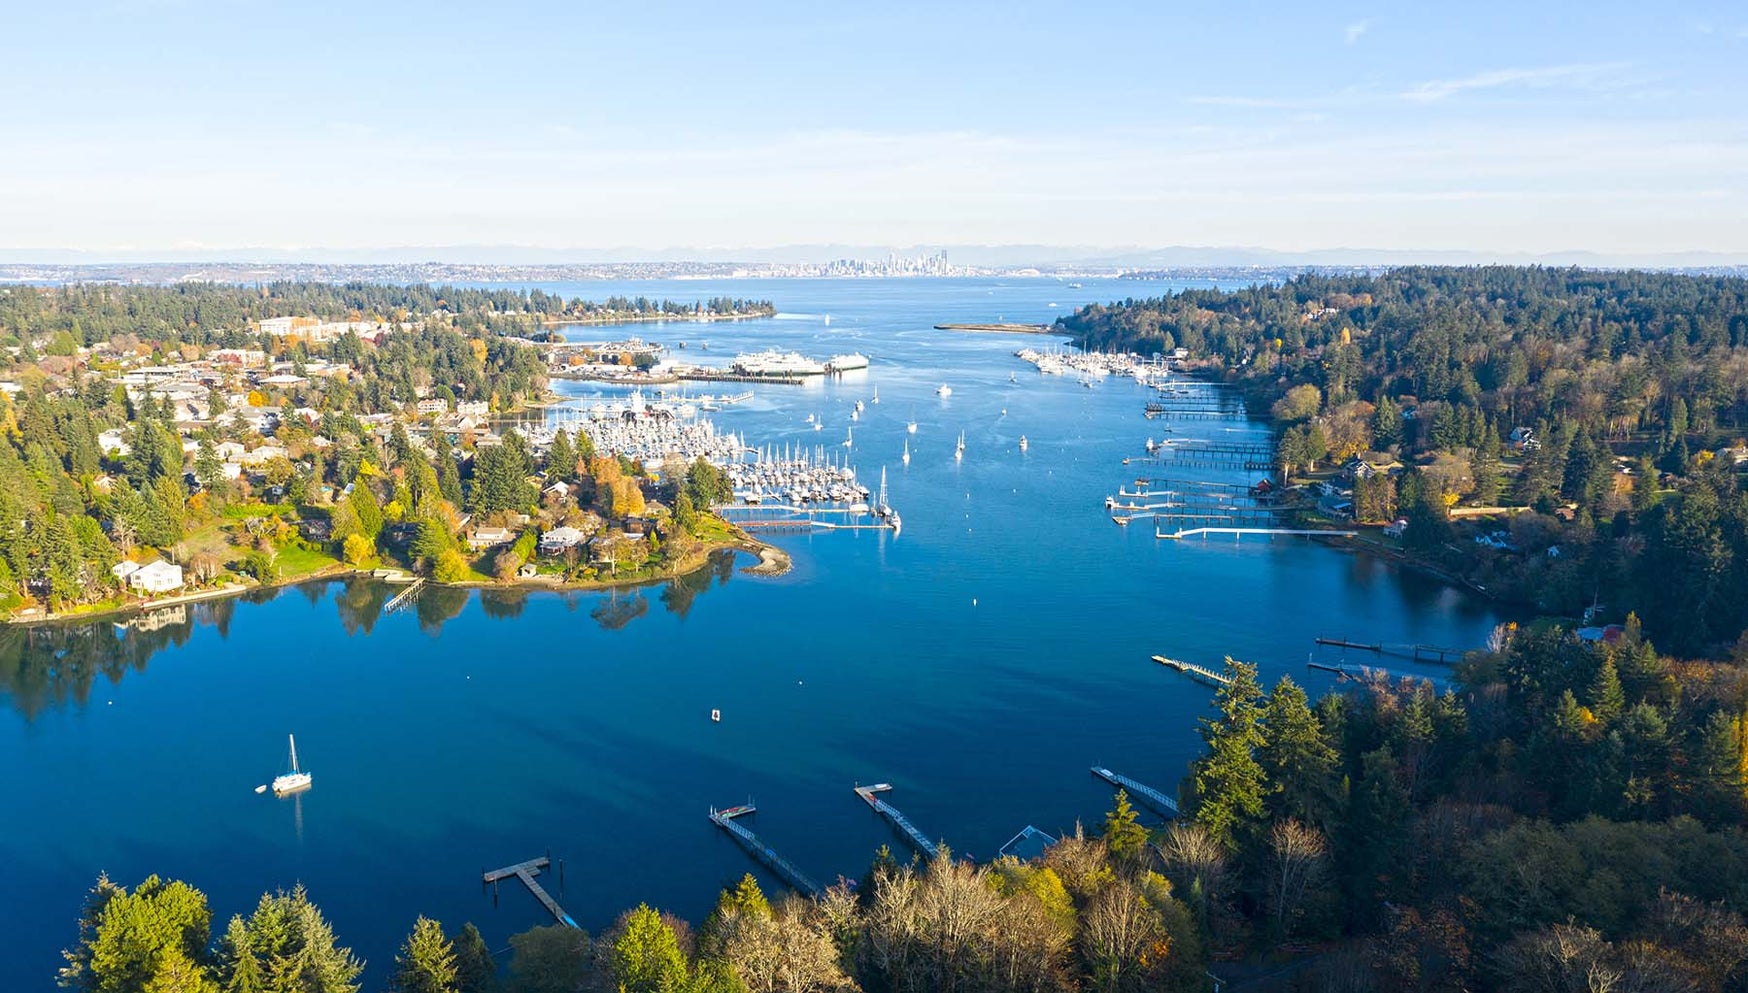 An aerial view of Kitsap area and the surrounding waters